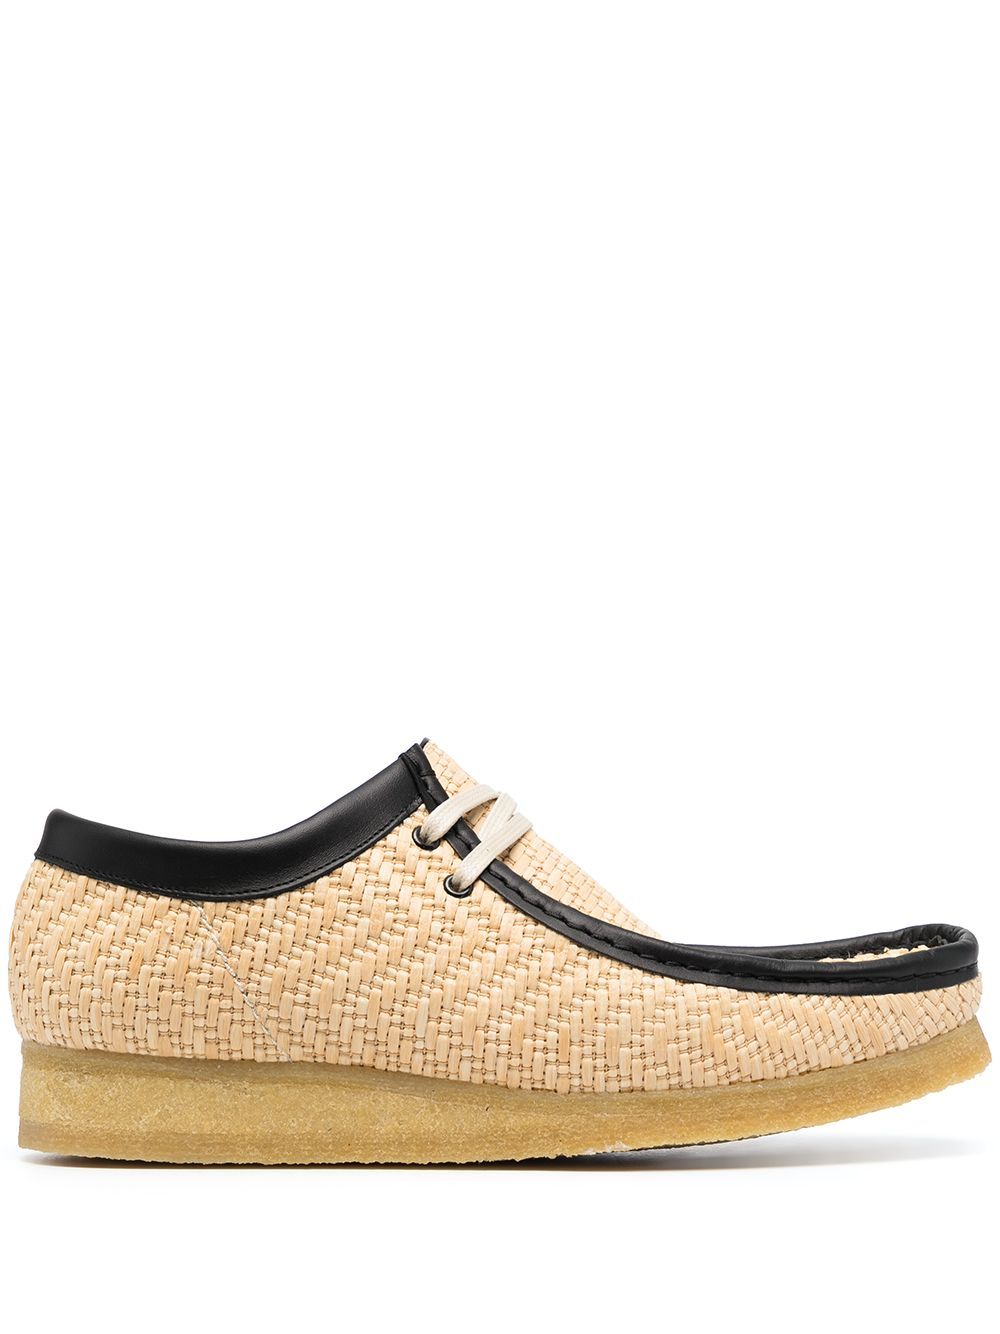 clarks lace ups